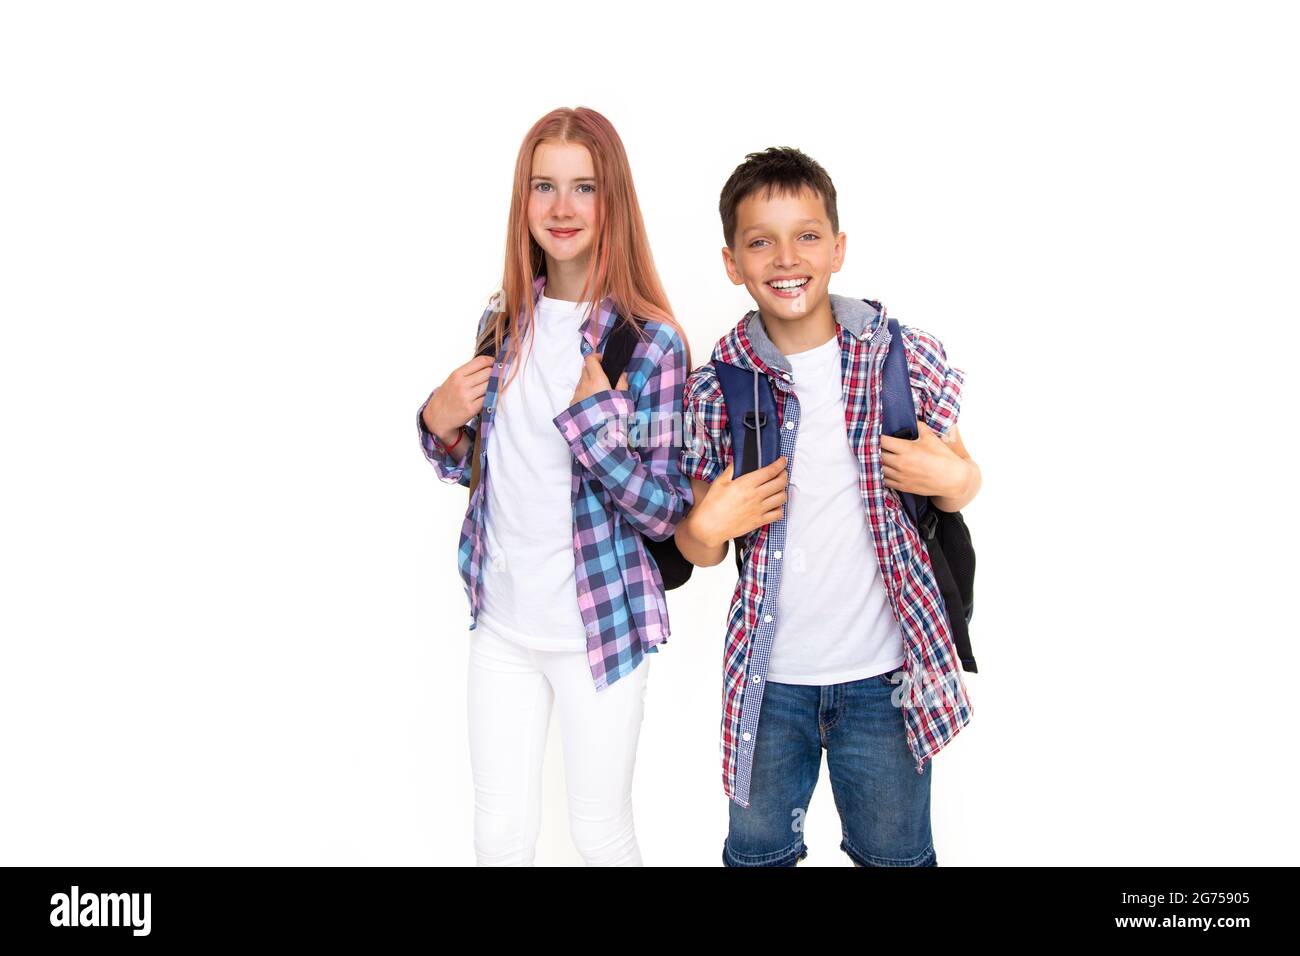 Boy and girl teenager 11 years old schoolboy and schoolgirl looking at camera on white background with backpack and smiling. Dressed in plaid shirt, w Stock Photo